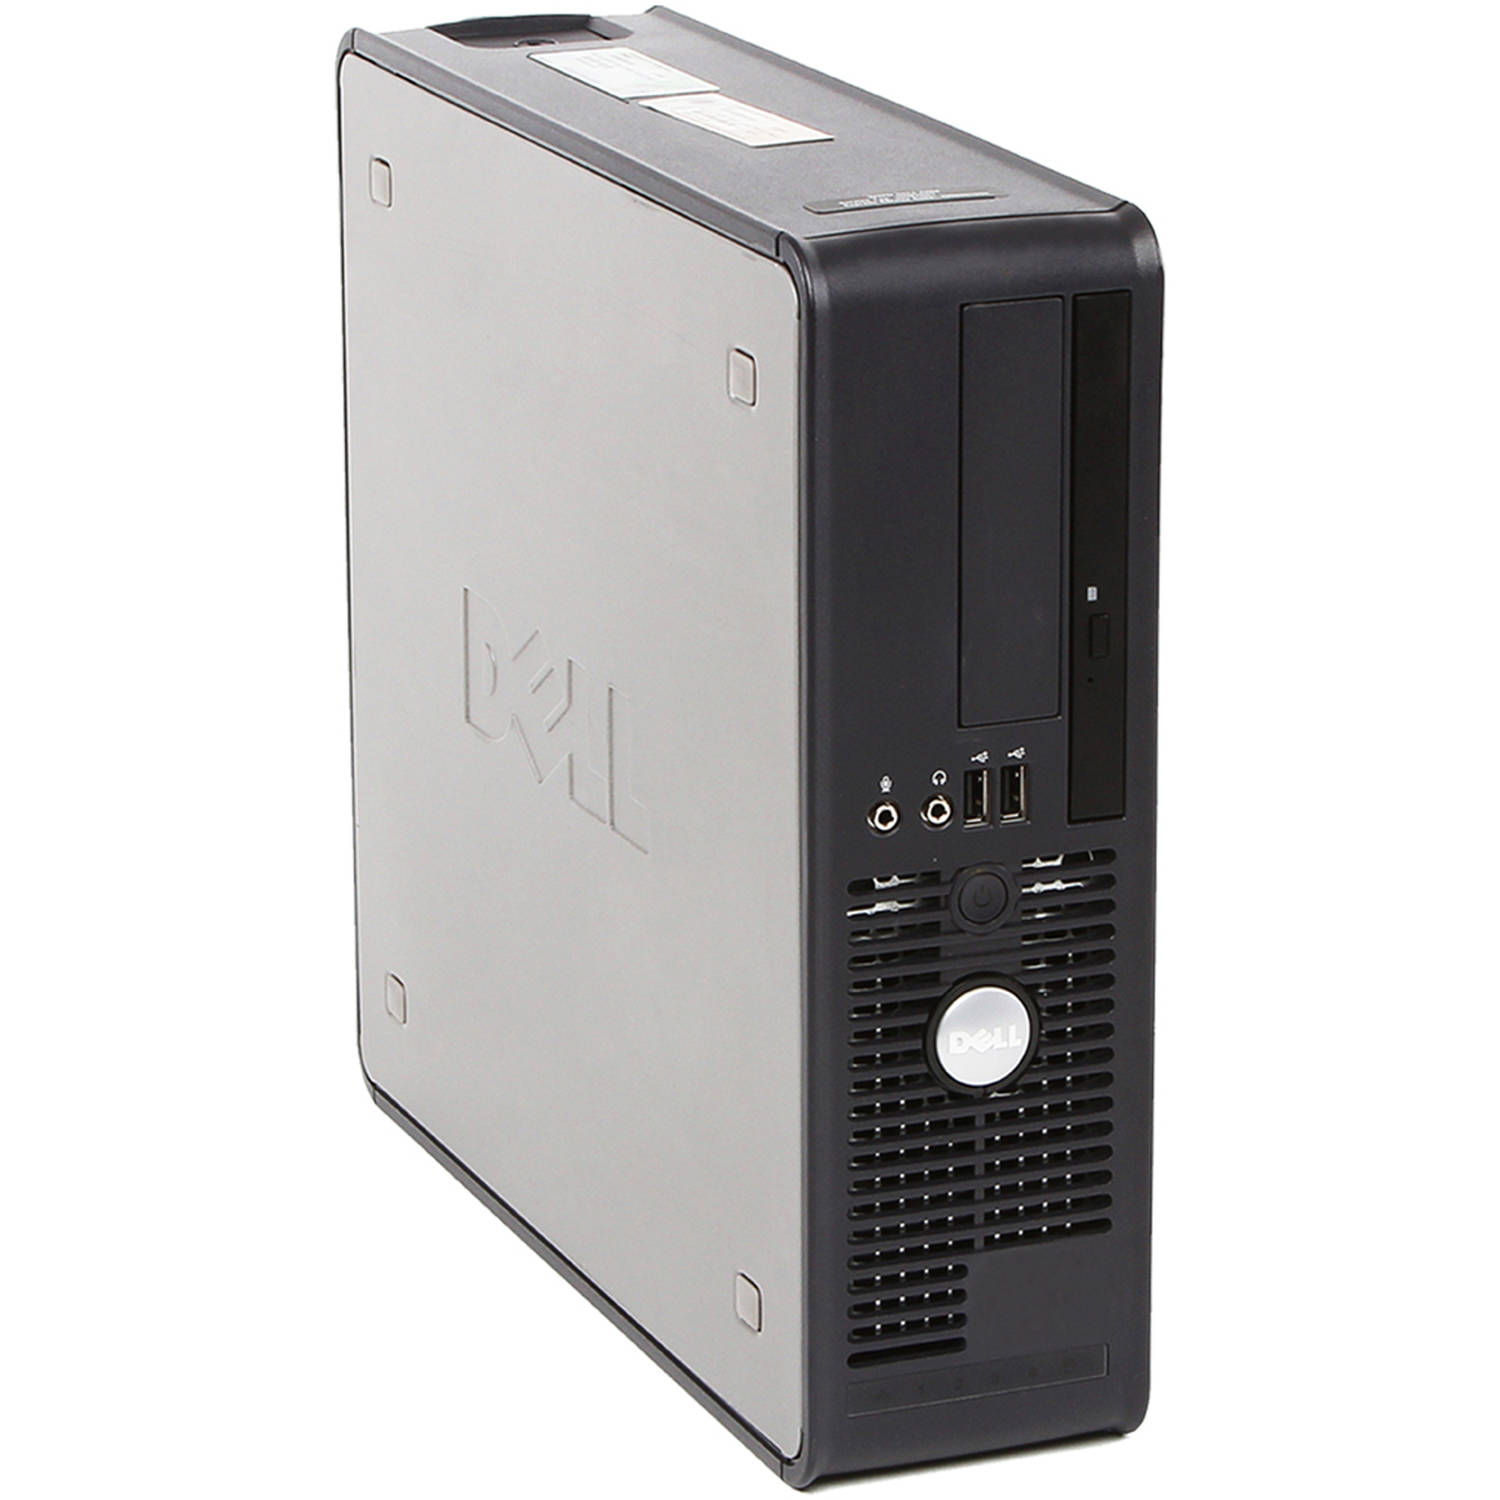 Restored Dell Small Form Factor Desktop PC with Intel Core 2 Duo Processor, 4GB Memory, 250GB Hard Drive DVD Wi-Fi and Windows 10 Home (Refurbished) - image 1 of 5